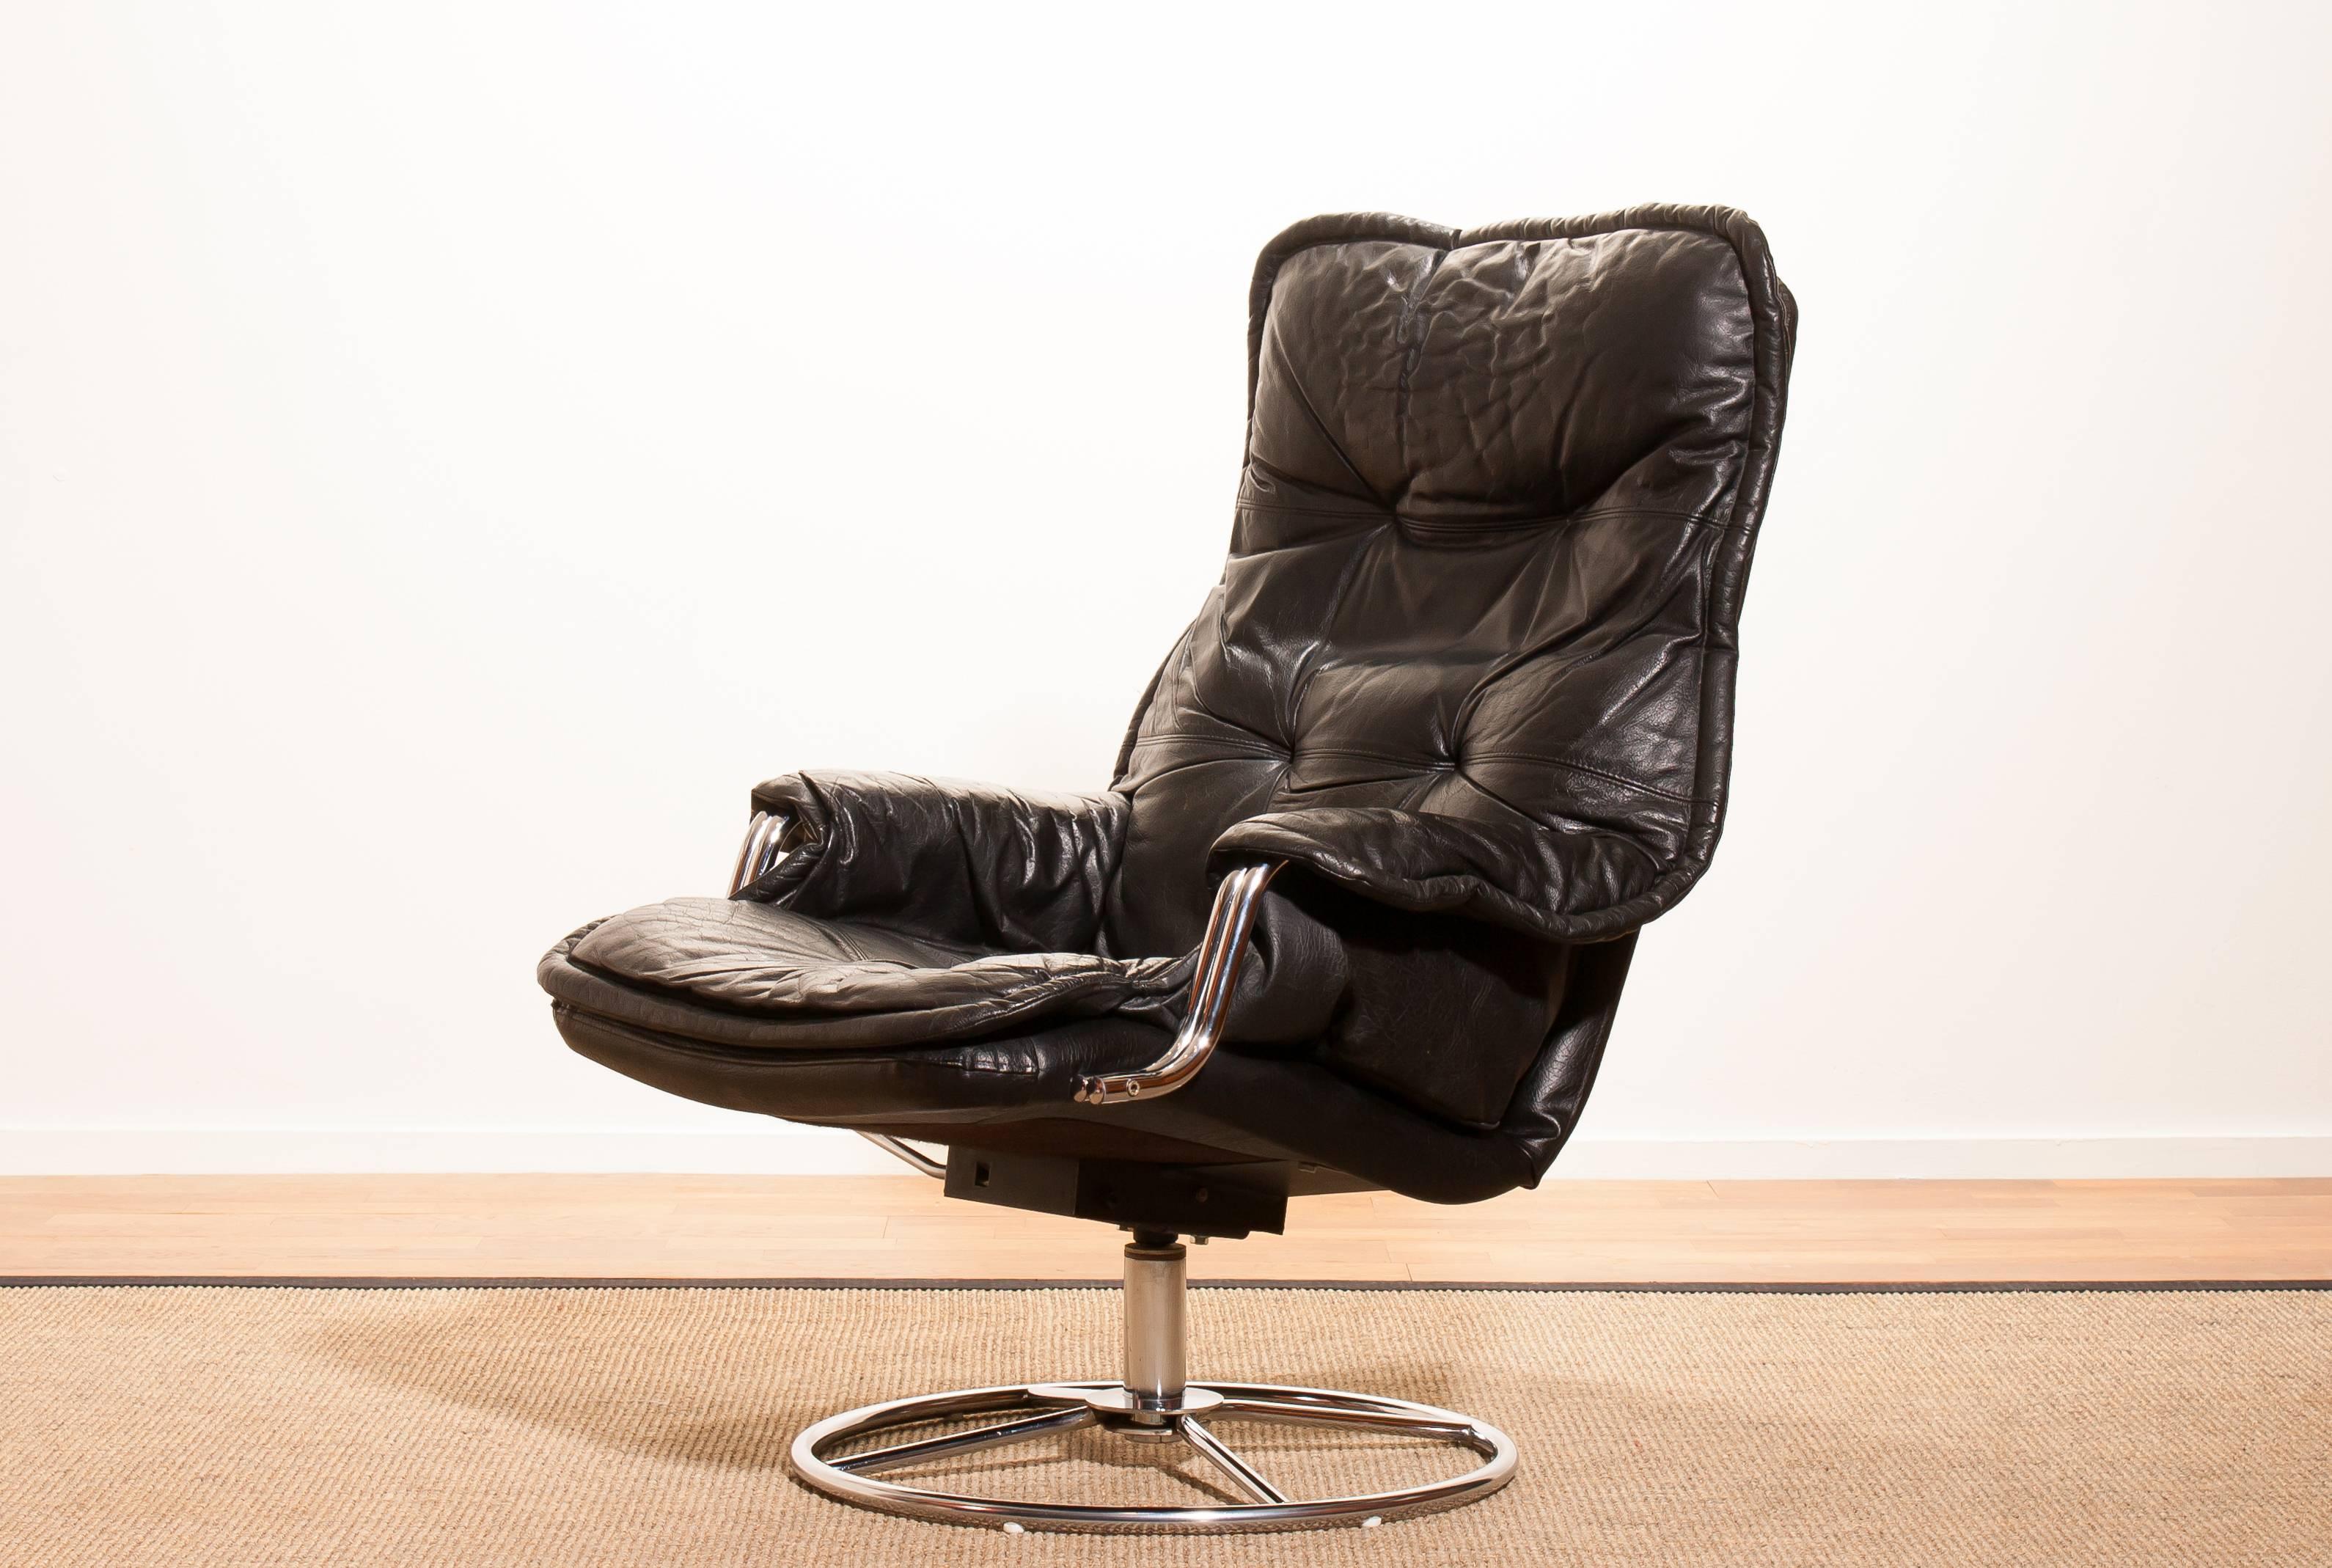 Beautiful lounge chair made in Sweden.
This very nice design chair has a black leather seating and armrests on a swivel chrome steel frame.
It is in a wonderful condition.
Period 1970s.
Dimensions: H 94 cm, W 68 cm, D 72 cm, SH 40.